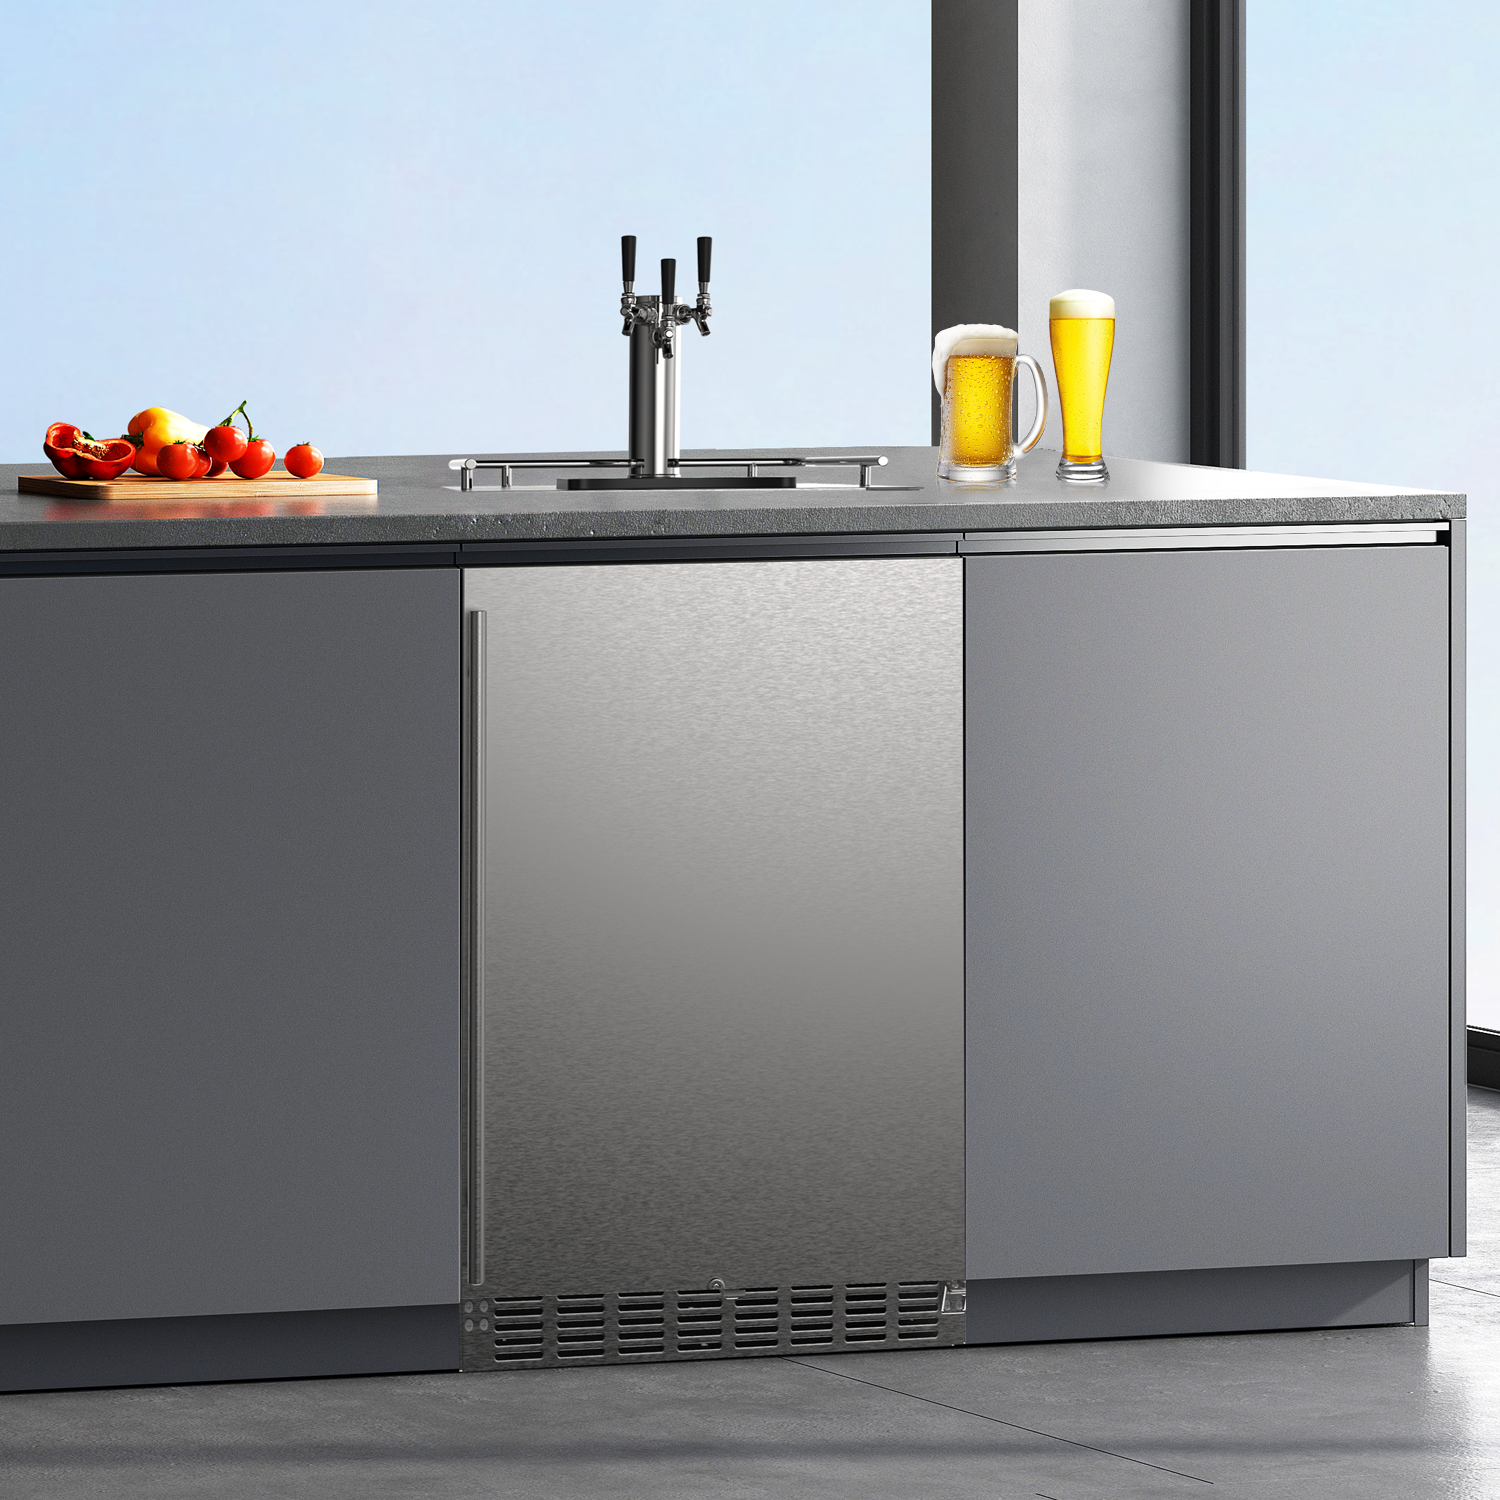 Side view of a 6.04 Cu Ft Undercounter Kegerator Outdoor Beverage Fridge installed within a kitchen table in a kitchen setting